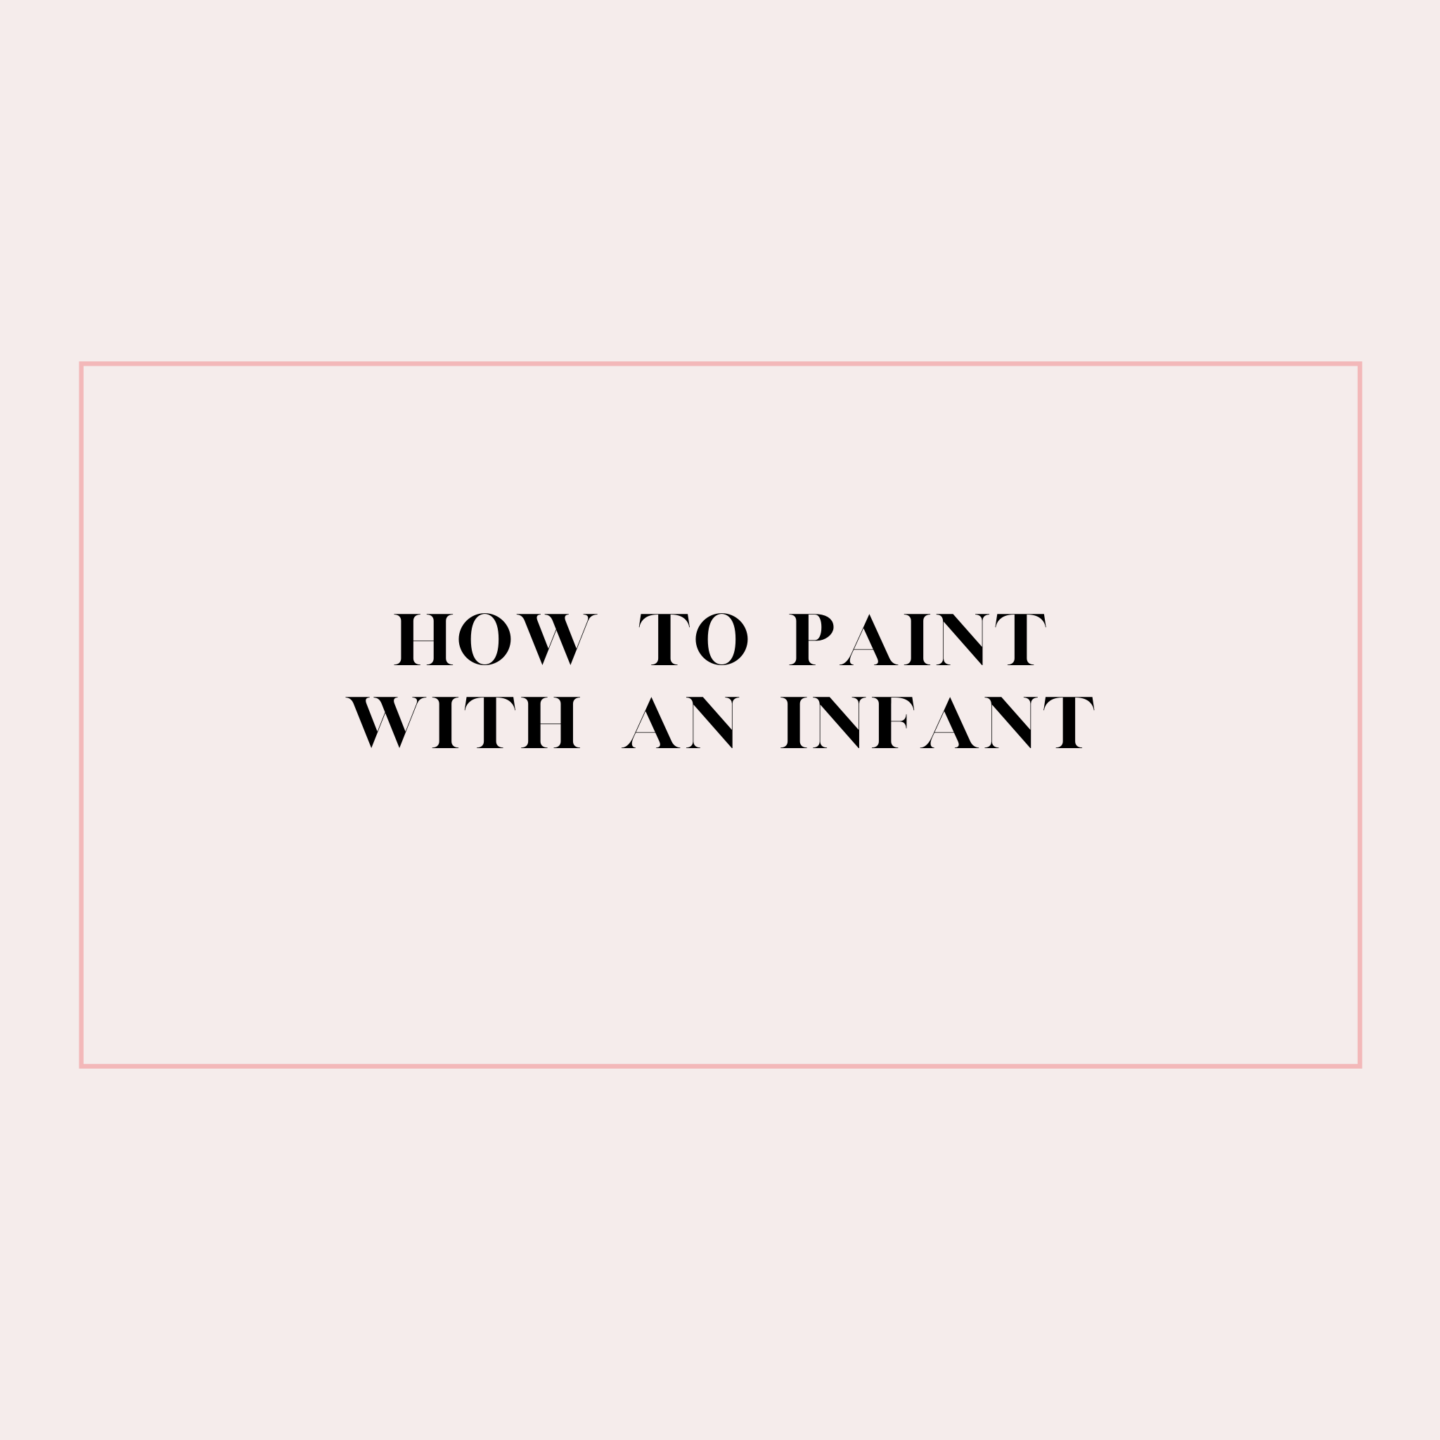 How to Paint with an Infant